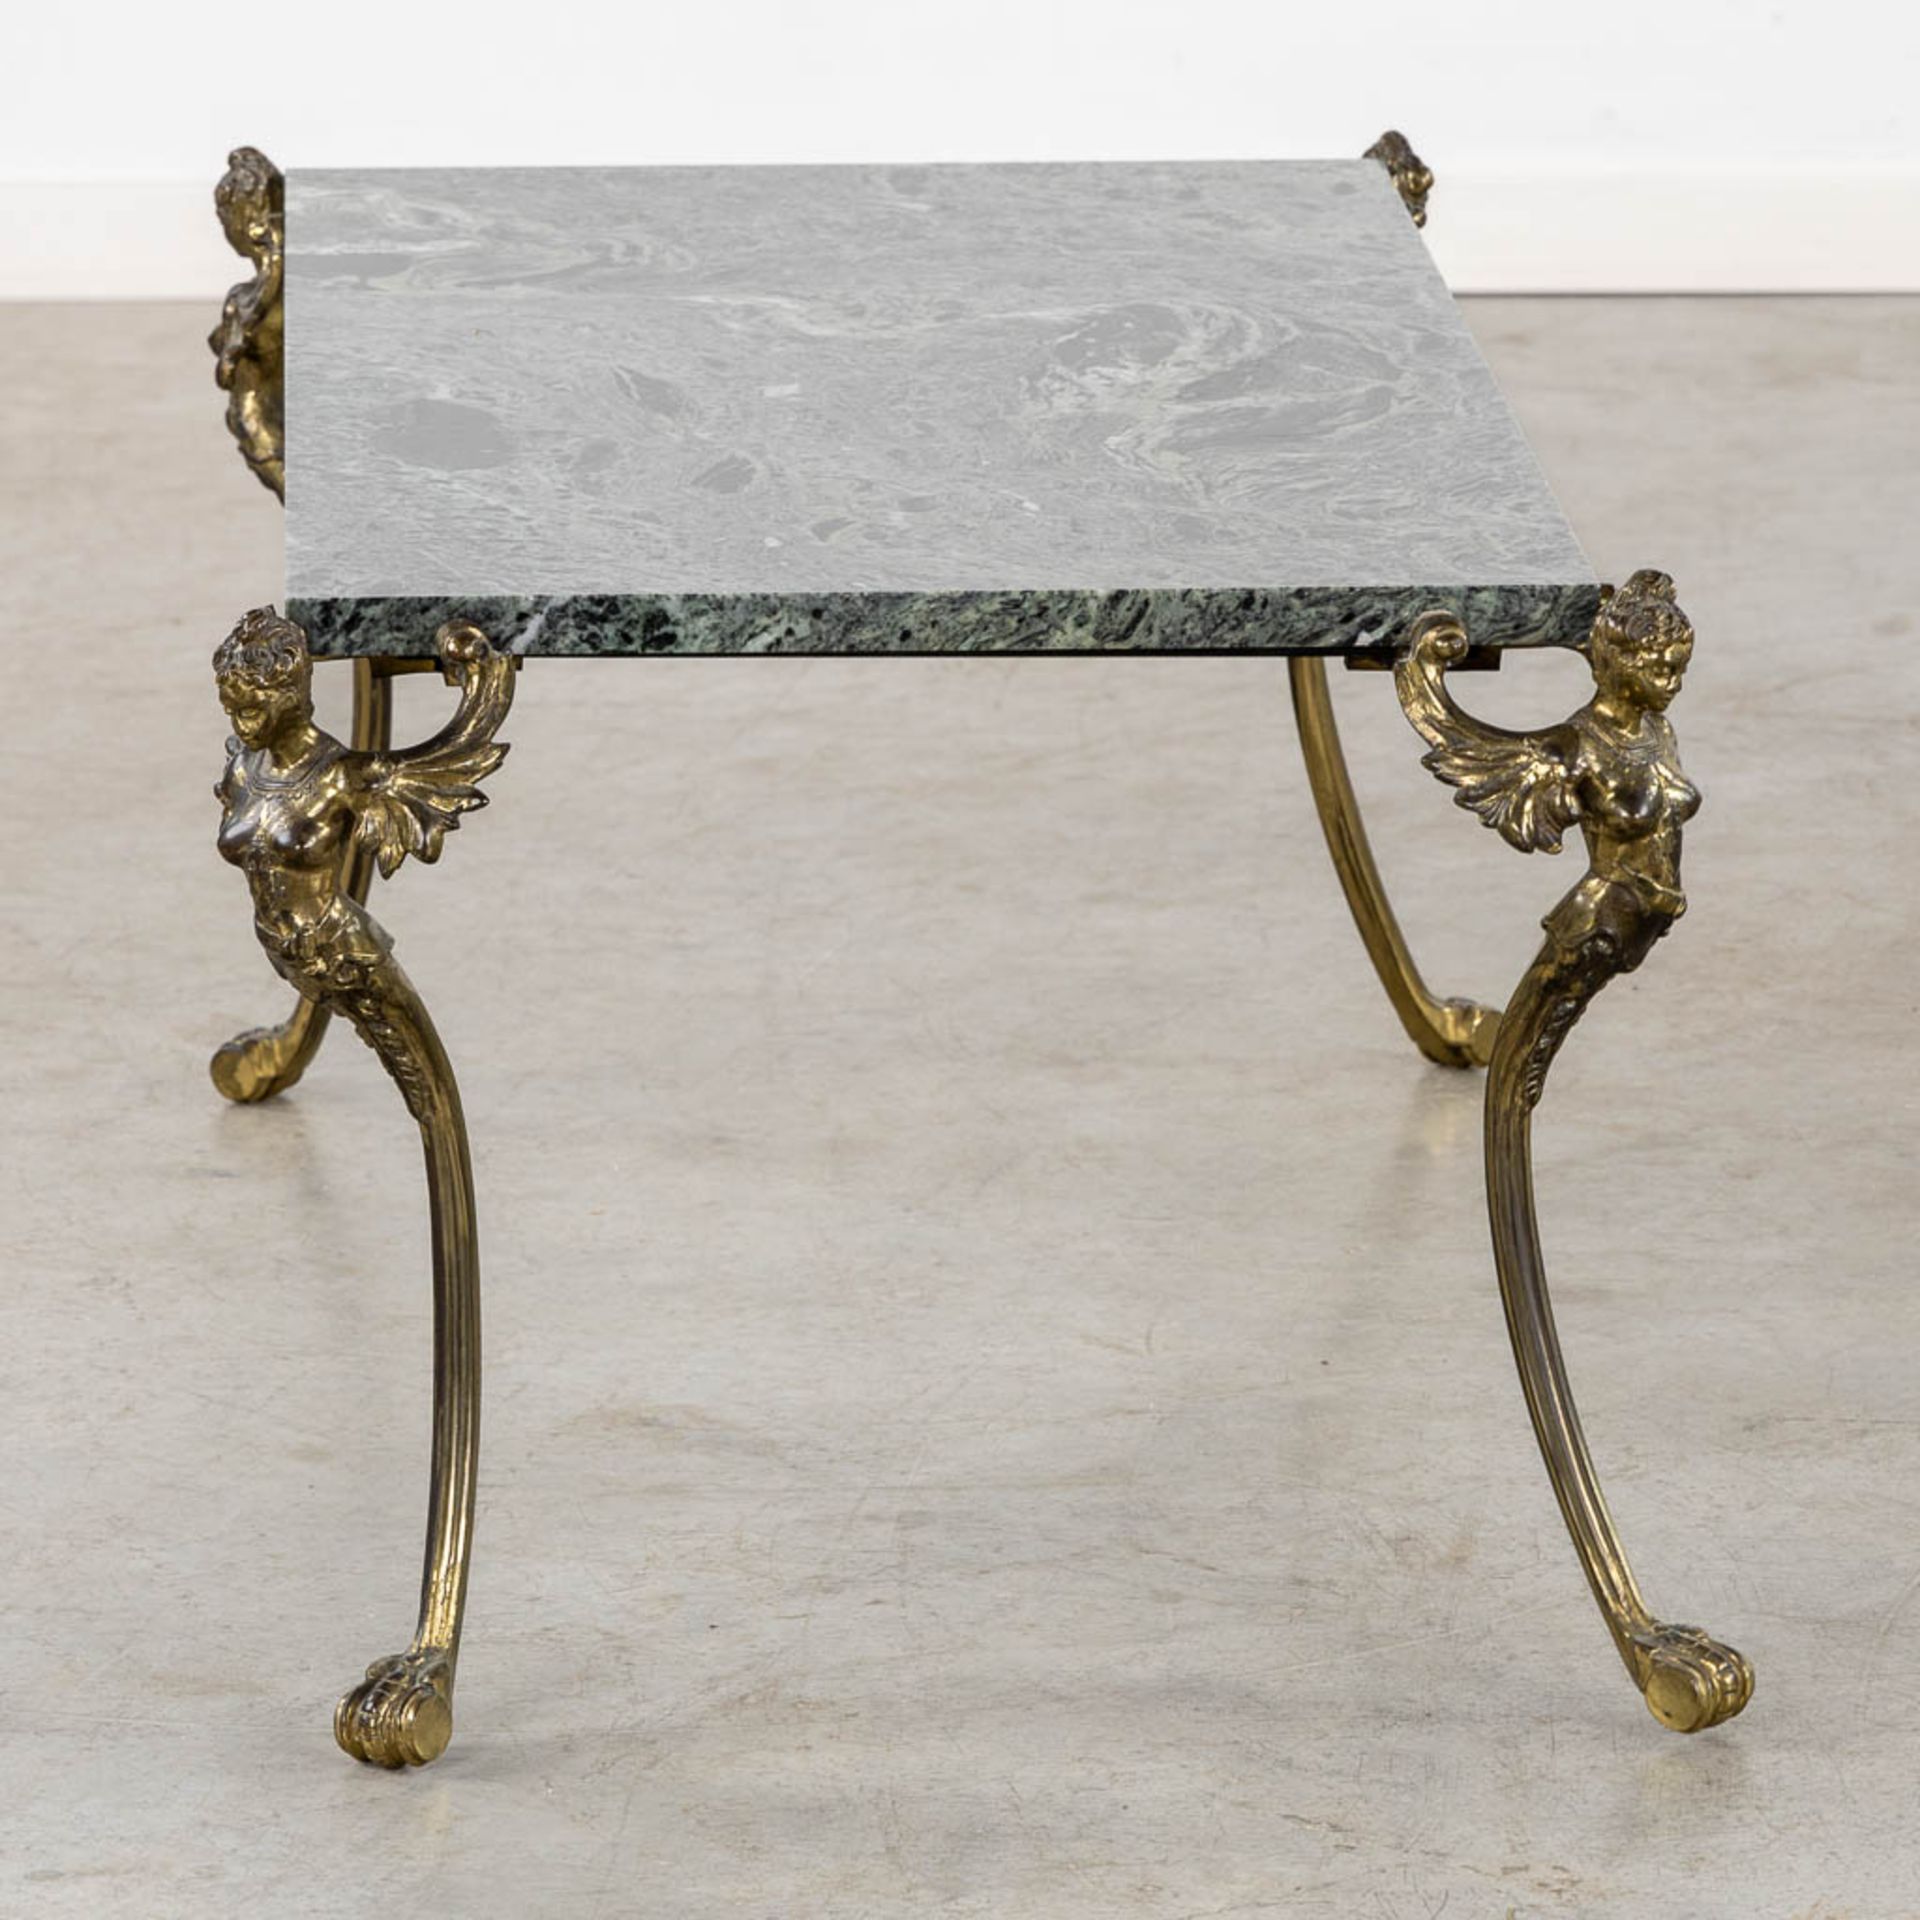 A marble and bronze coffee table, added a floorlamp. Circa 1960. (L:52 x W:101 x H:41 cm) - Image 13 of 19